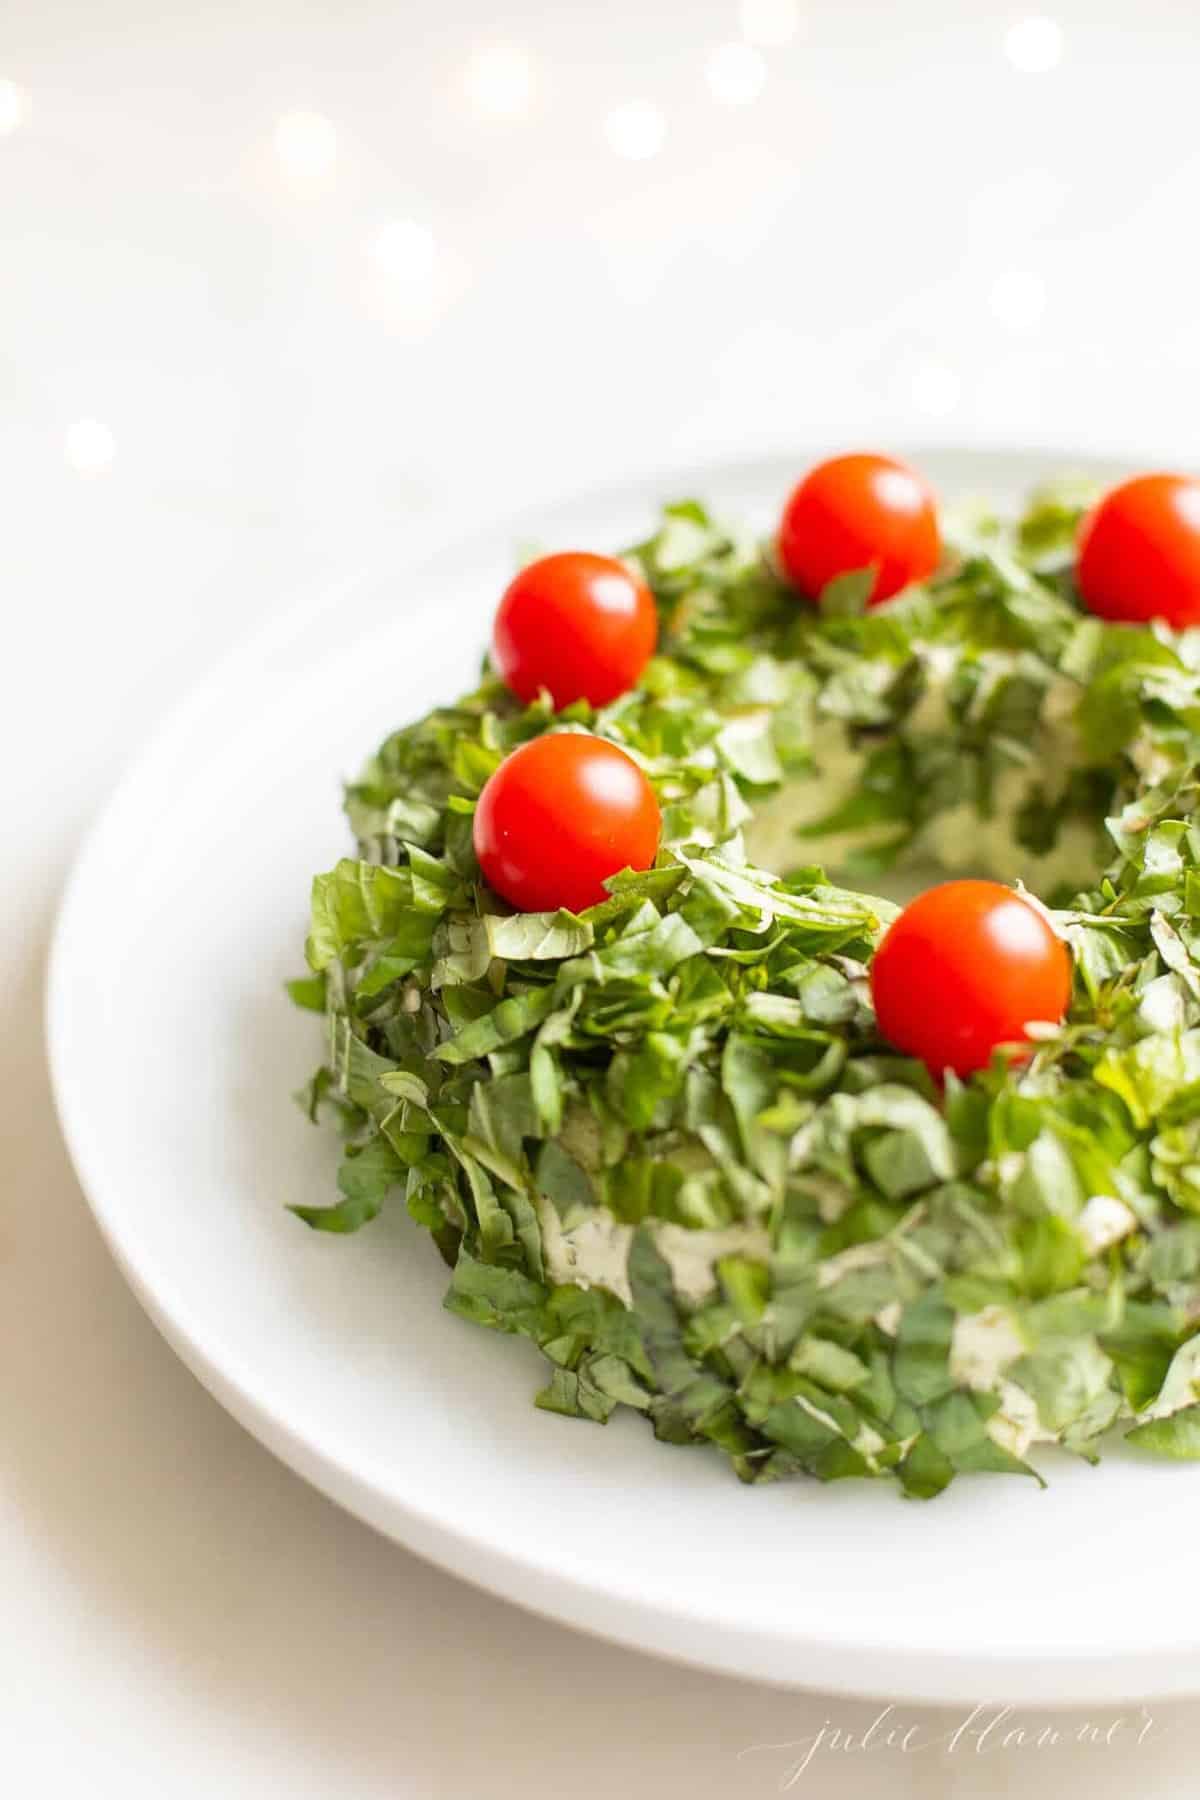 White marble surface with a white platter, featuring a pesto cheese appetizer in the shape of a wreath covered in basil, cheery tomatoes on top for ornaments.